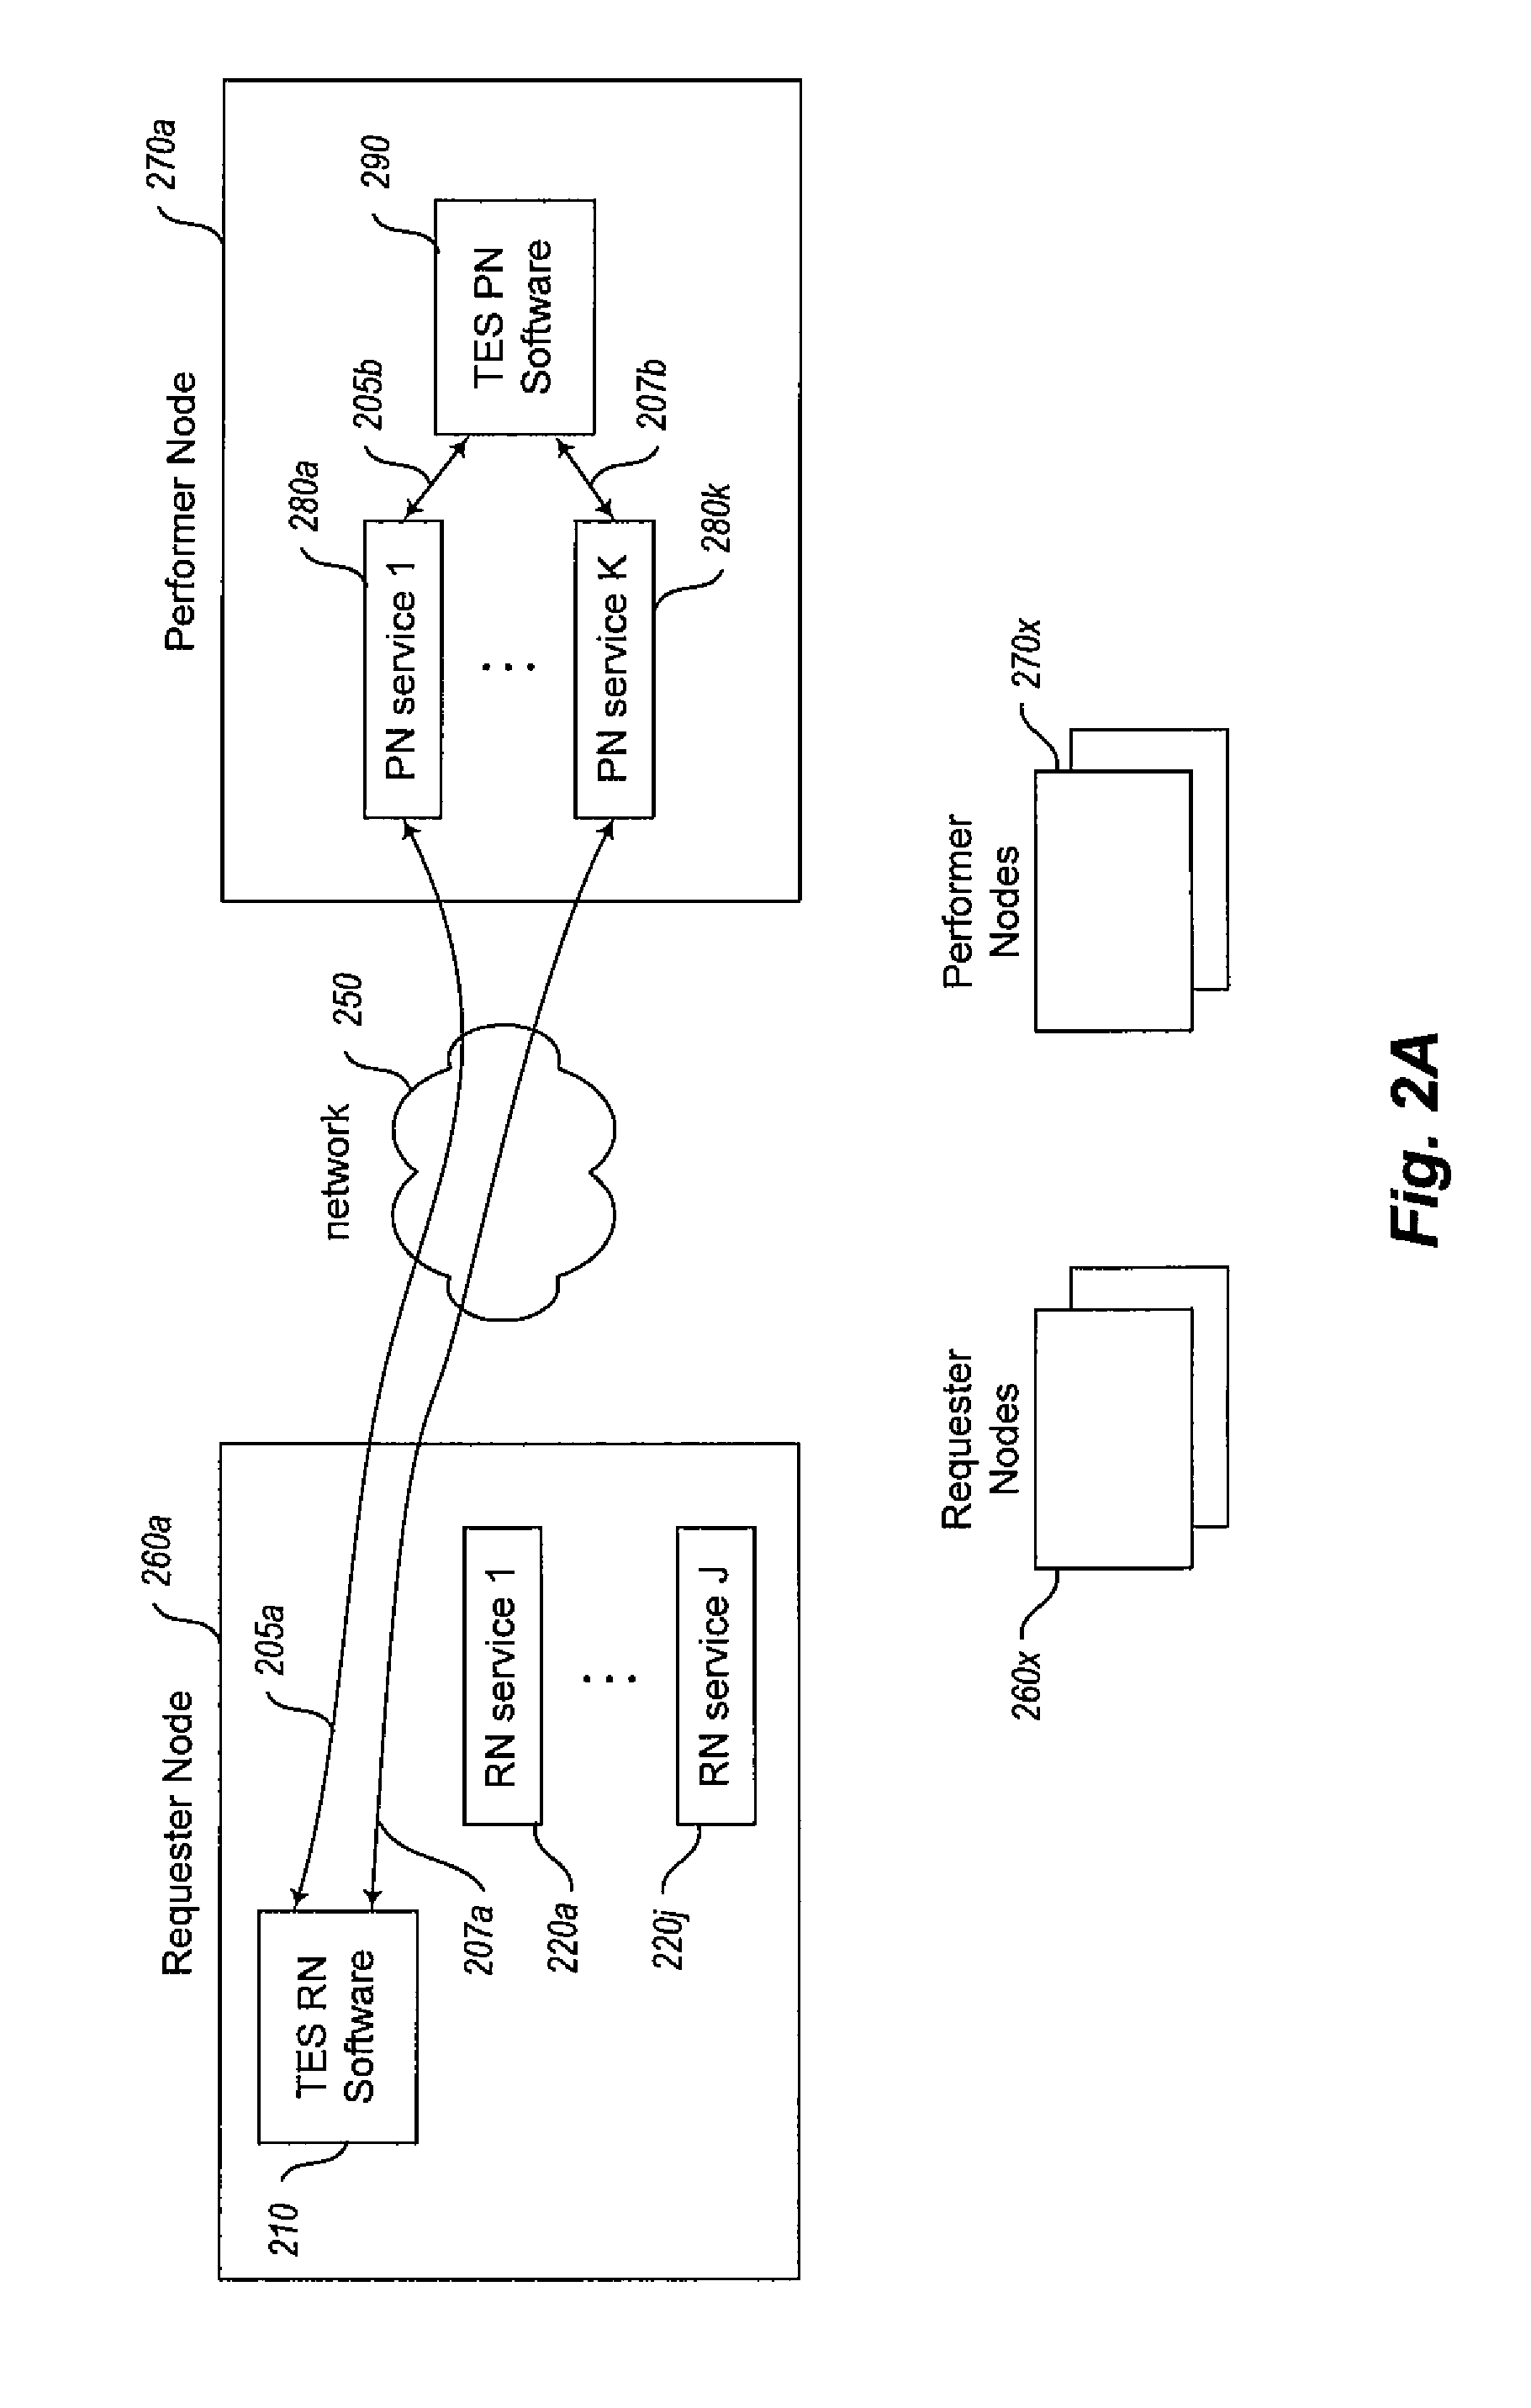 Providing enhanced interactions with software services